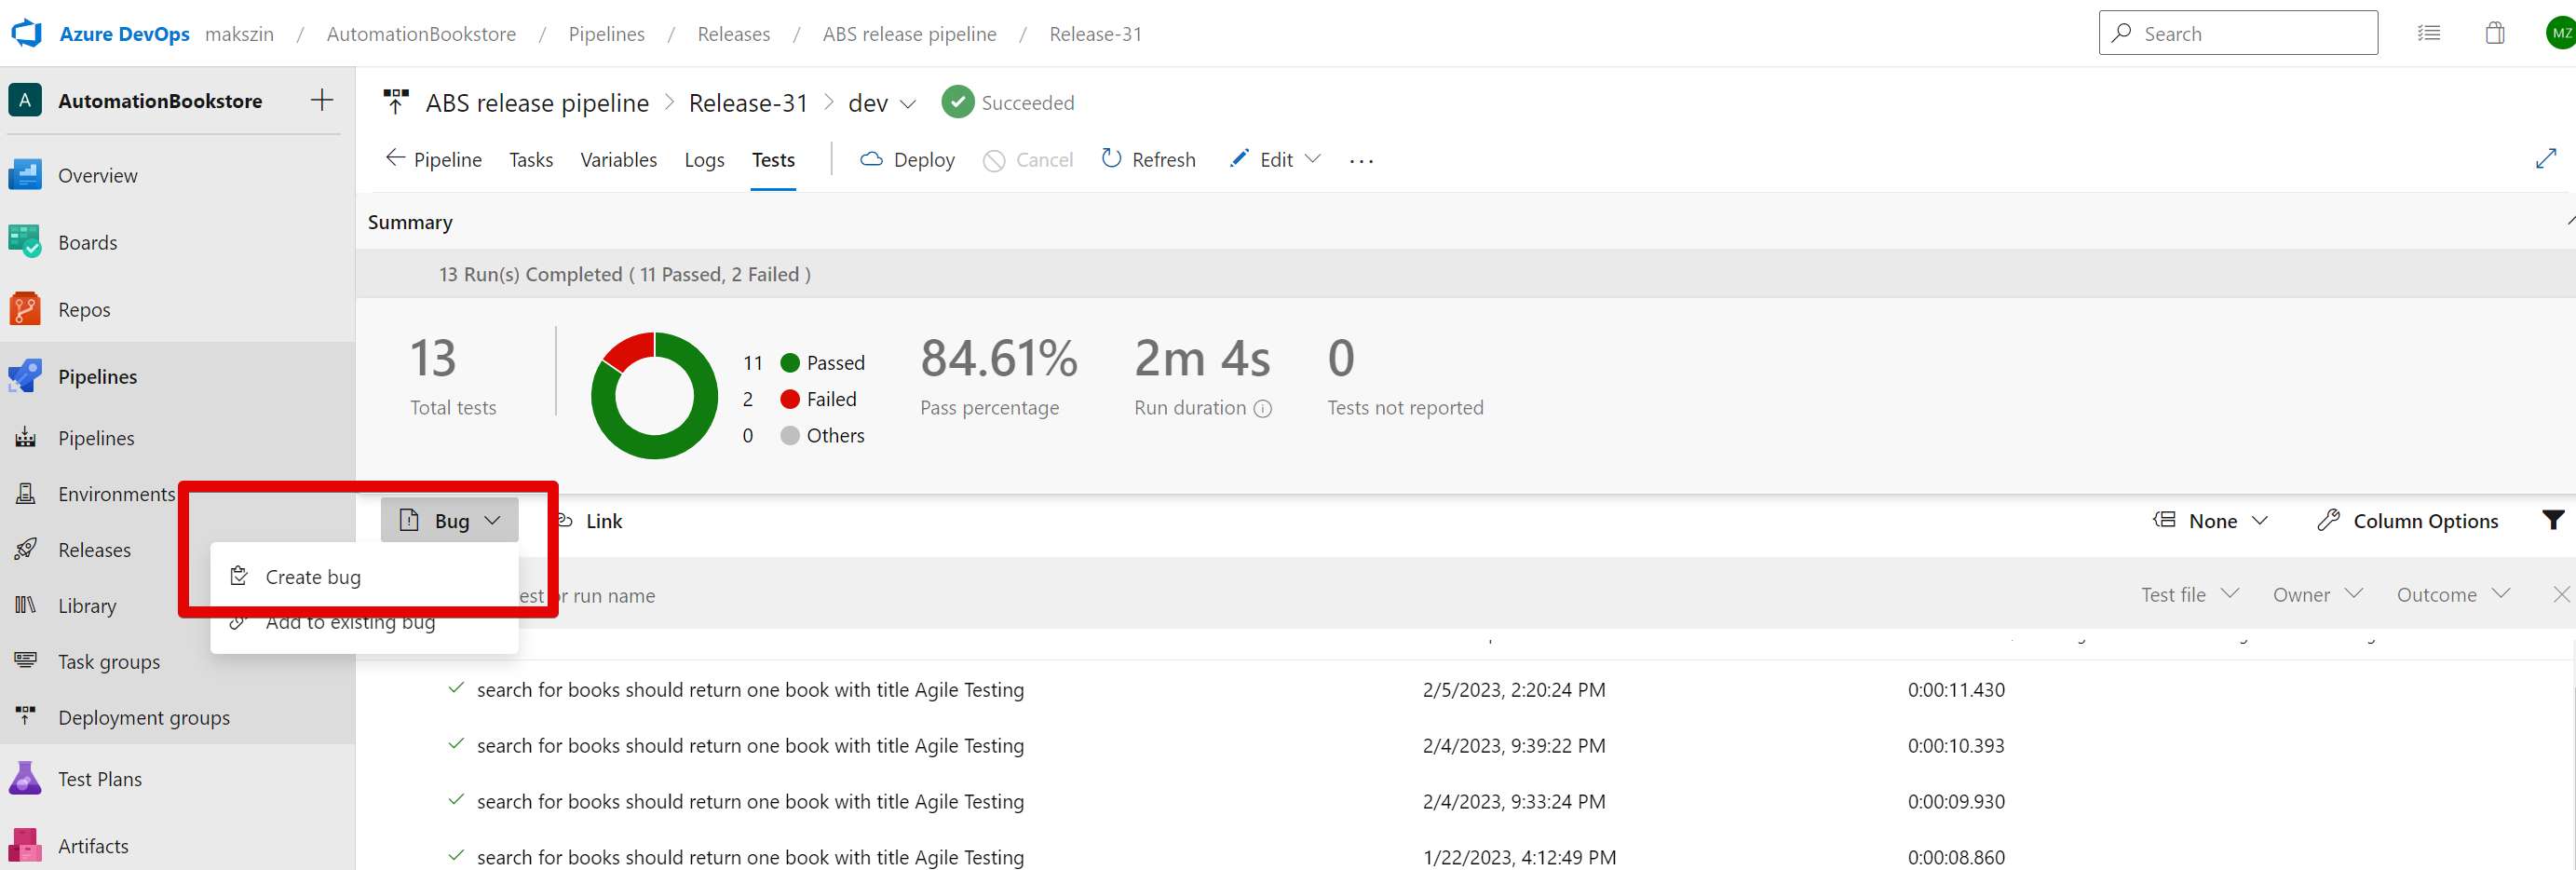 Continuous Testing with Azure DevOps TAU course-1677404770269.jpeg